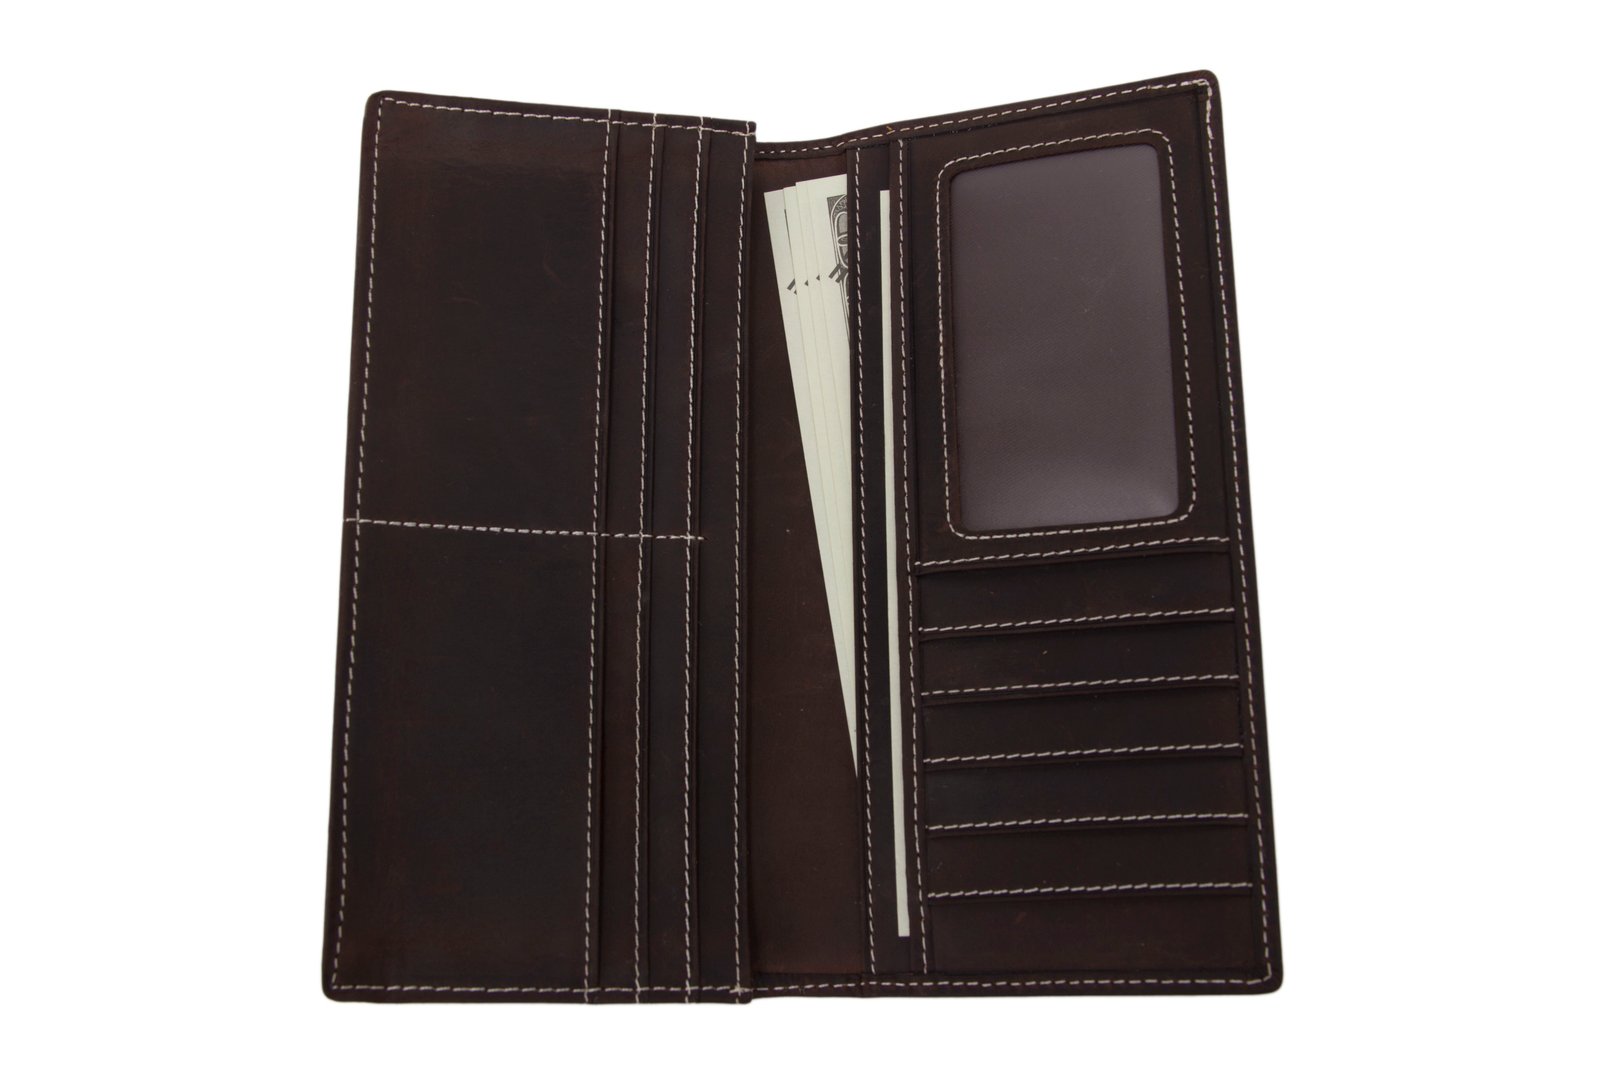 WilliamPolo Leather RFID Blocking Long Card Holder Wallets for Men